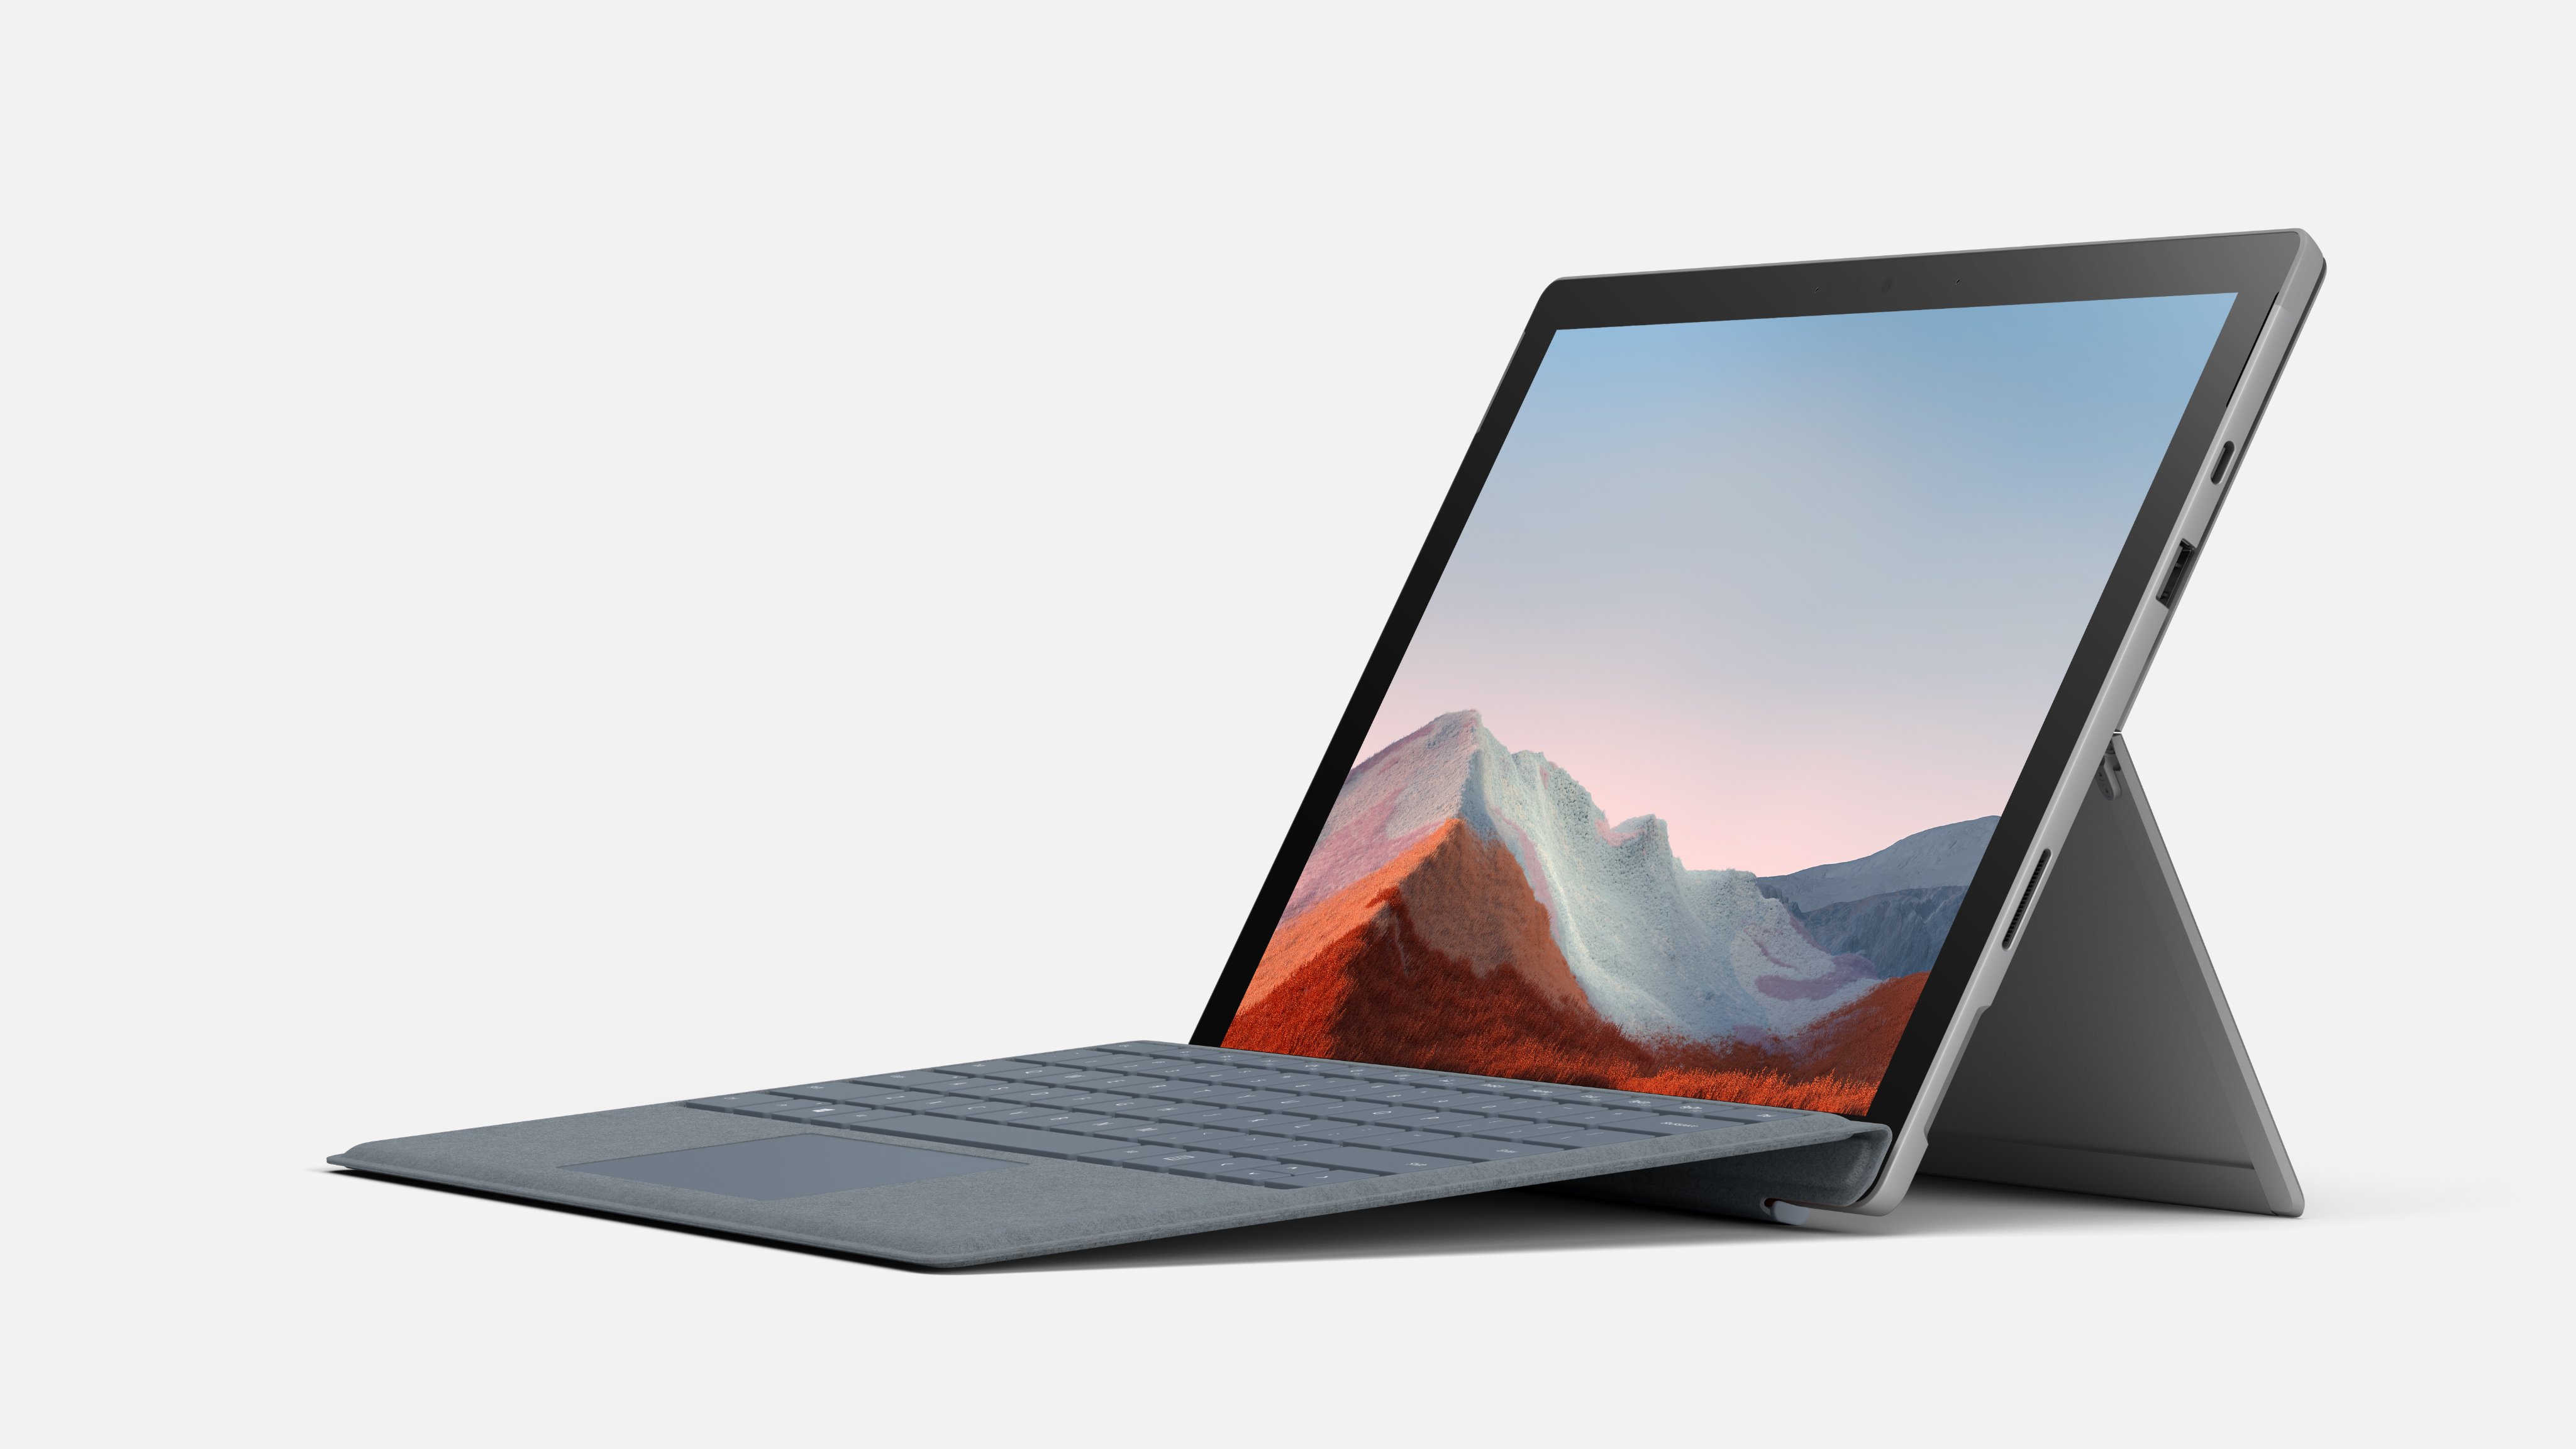 Microsoft Surface Pro 7 Plus presented with a larger battery, a replaceable SSD, Tiger Lake processors and LTE support